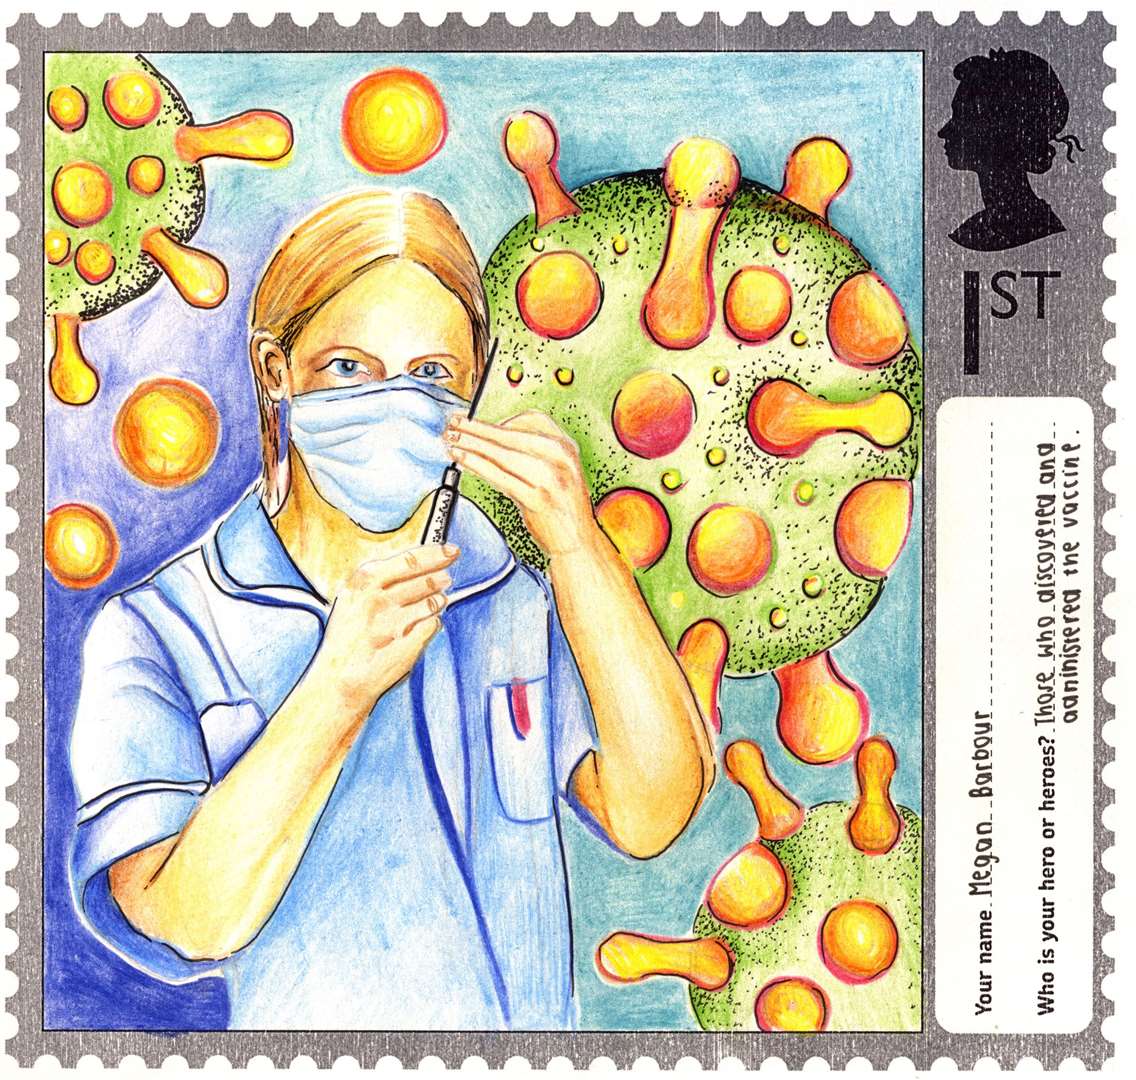 Vaccine creators and those who delivered the jab were chosen in this design (Royal Mail/PA)